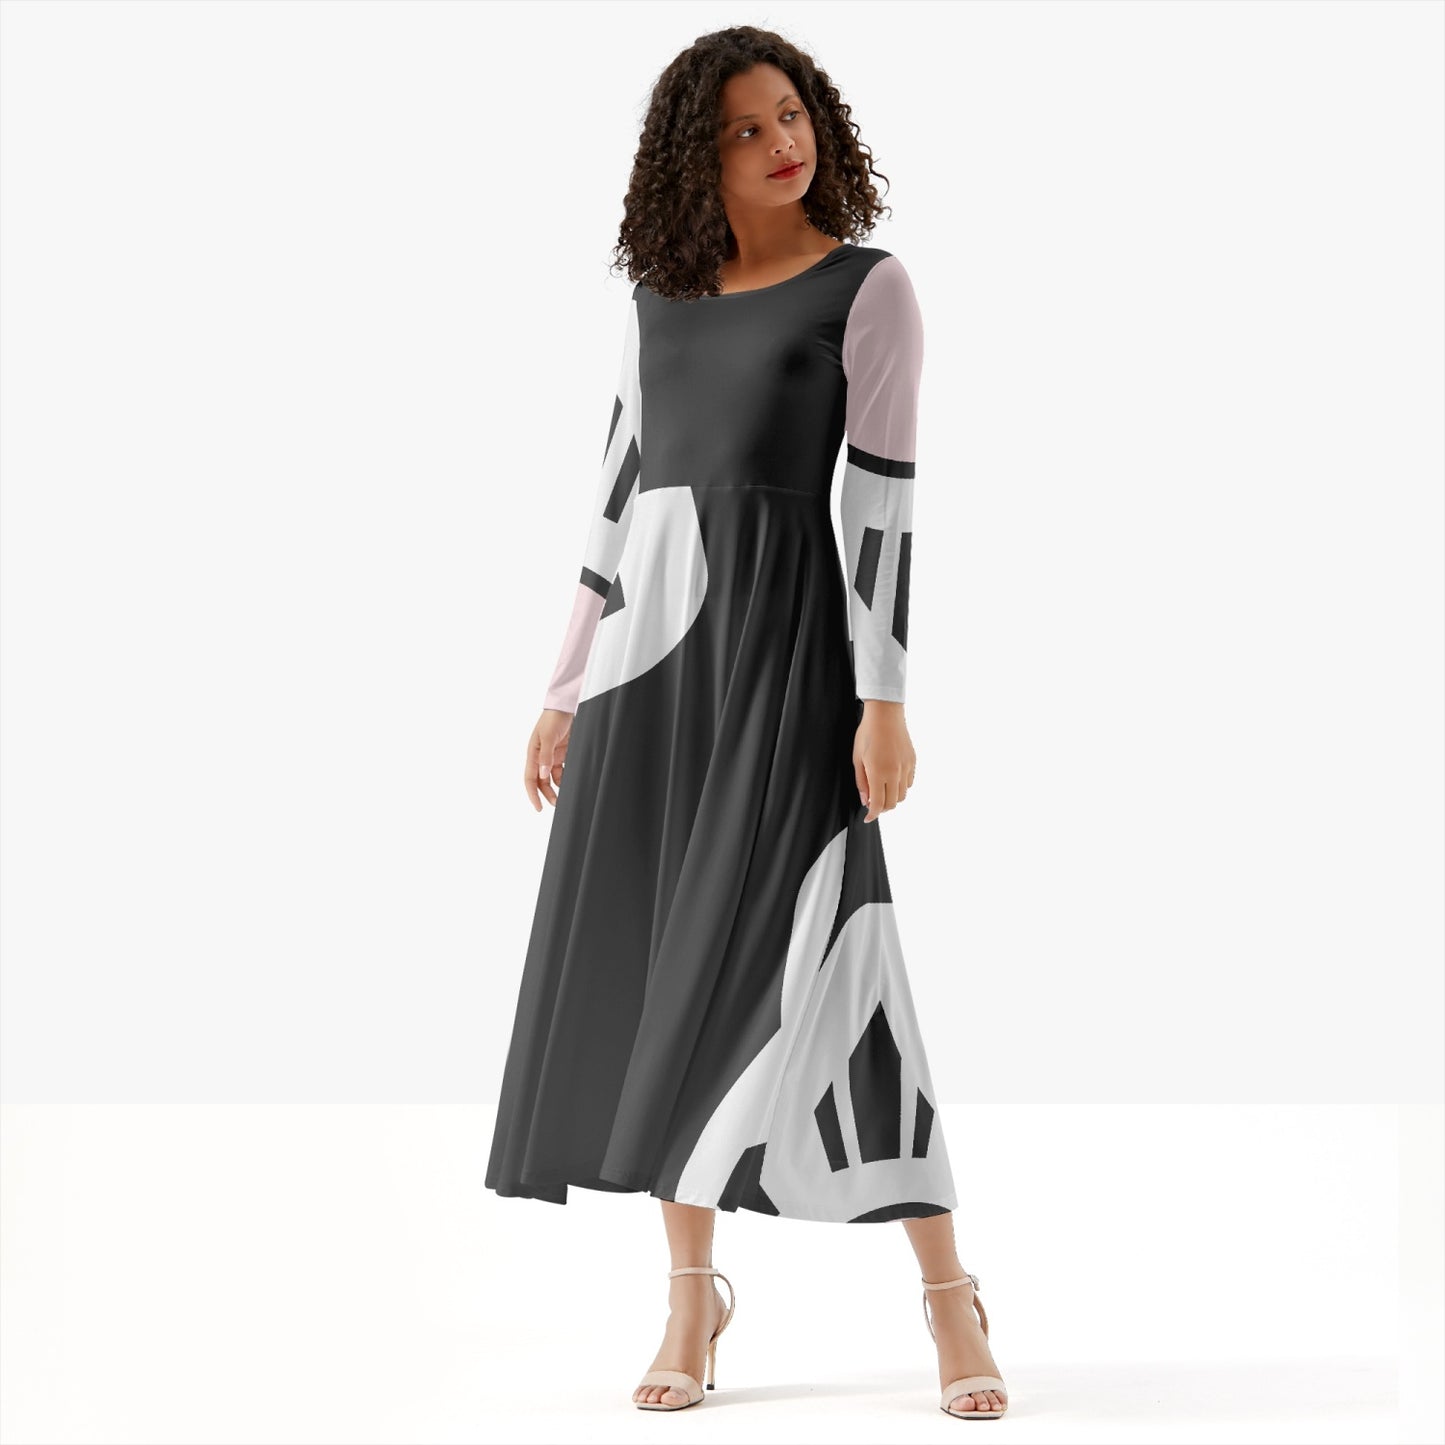 Long-Sleeve One-piece Dress, Black, White, Pink, Gifts for her